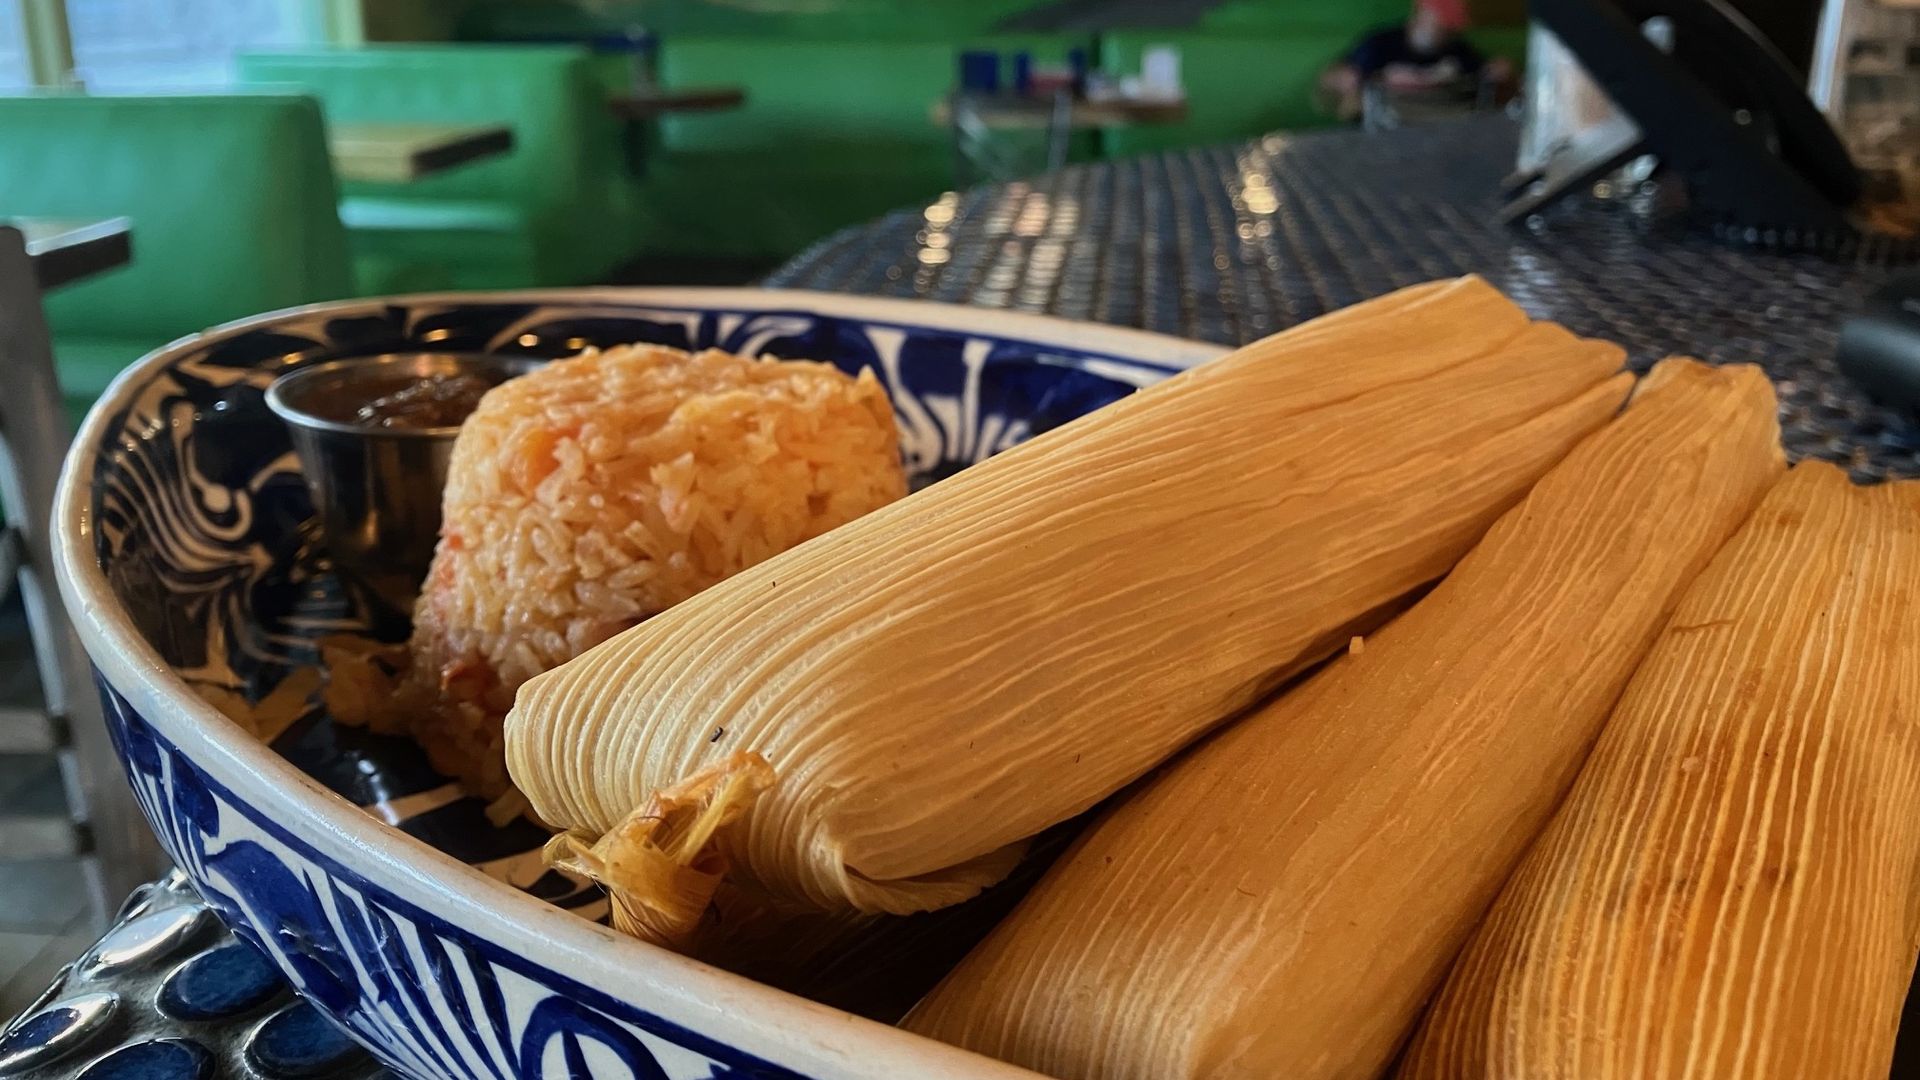 A stack of tamales at Curra's in South Austin